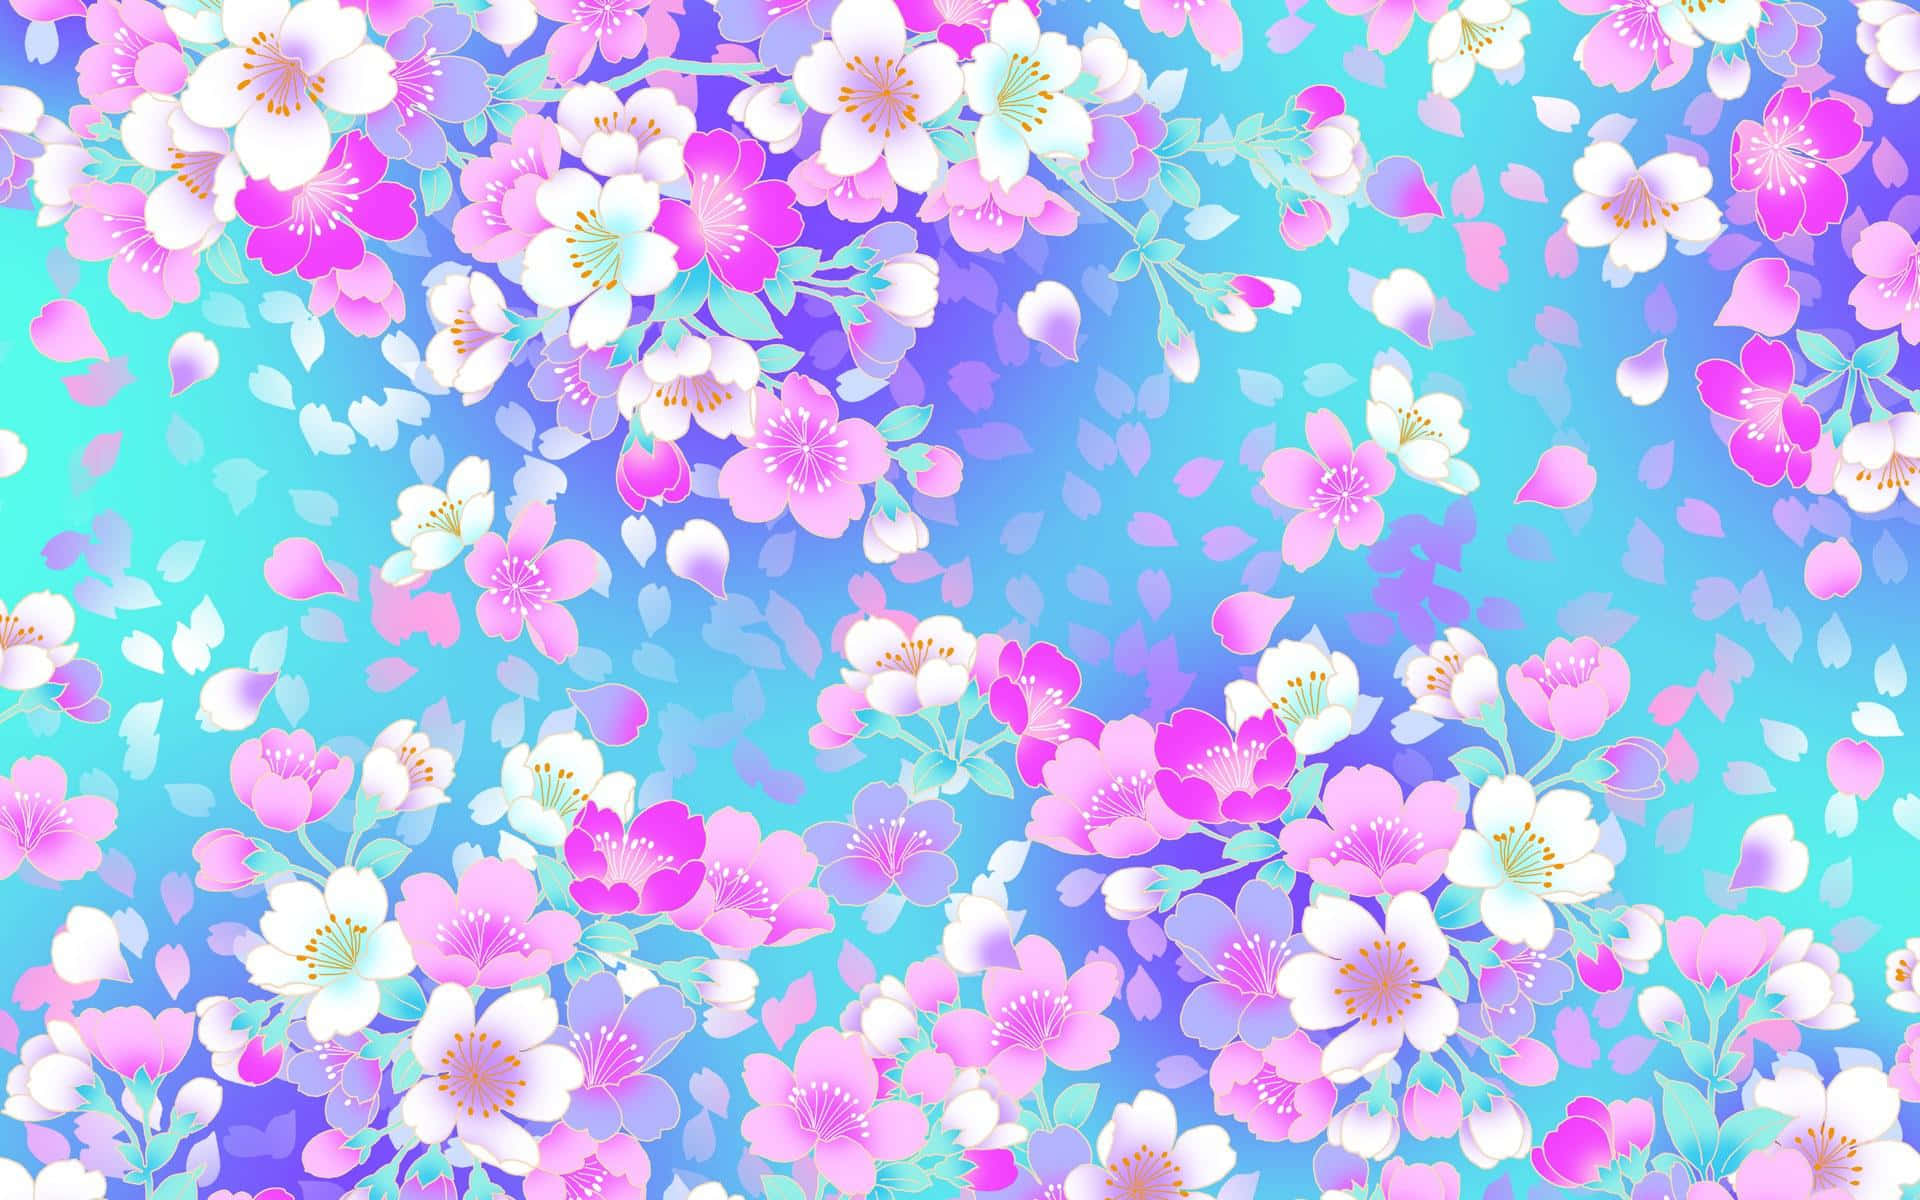 Adorable Kawaii Flower Bringing Joy and Vibrance to Your Space Wallpaper